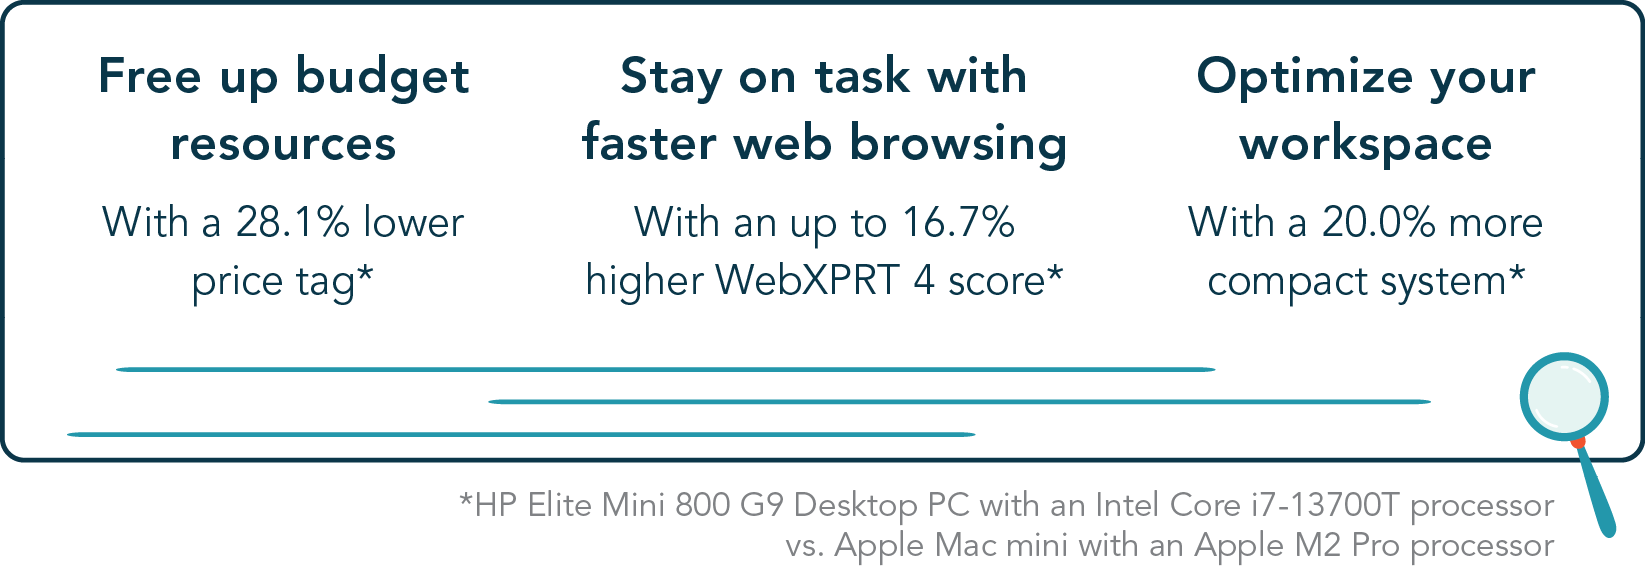 With the HP Elite Mini 800 G9 Desktop PC with an Intel Core i7-13700T processor vs. the Apple Mac mini with an Apple M2 Pro processor, you could: free up budget resources with a 28.1% lower price tag, stay on task with faster web browsing with an up to 16.7% higher WebXPRT 4 score, and optimize your workspace with a 20.0% more compact system.